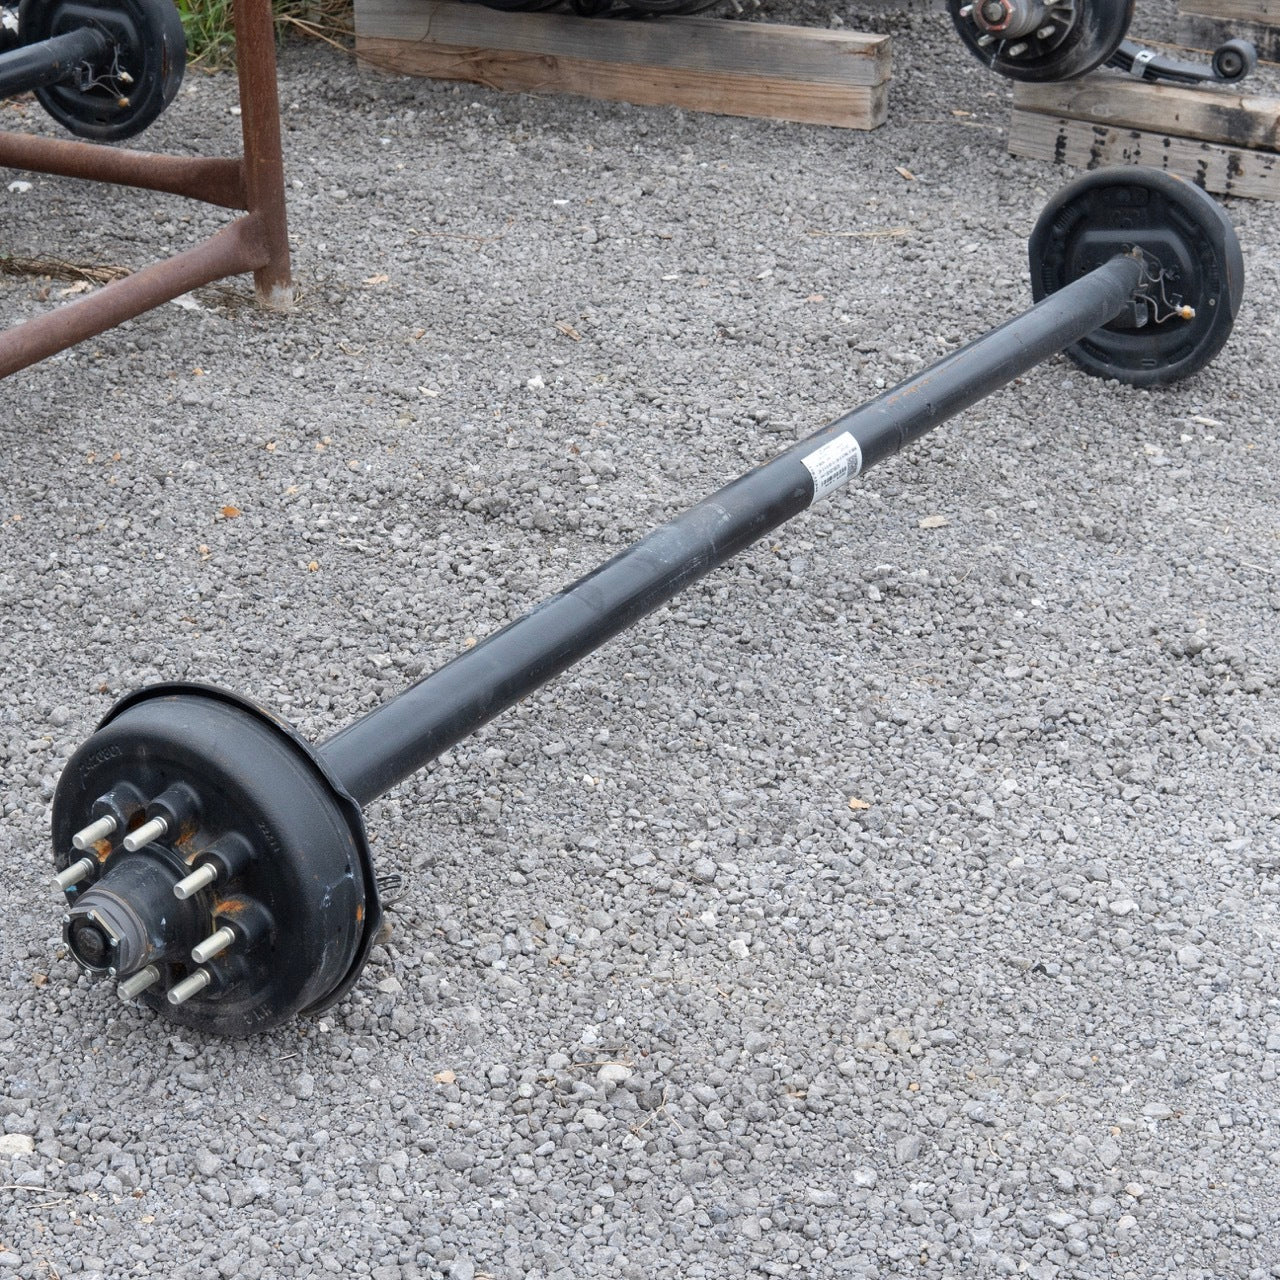 8k Lippert Hybrid Trailer Axle - 8000 lb Electric Brake 8 lug (12" x 2" Brake - 3" Tube) 95/80 - Items Sold As Is - The Trailer Parts Outlet